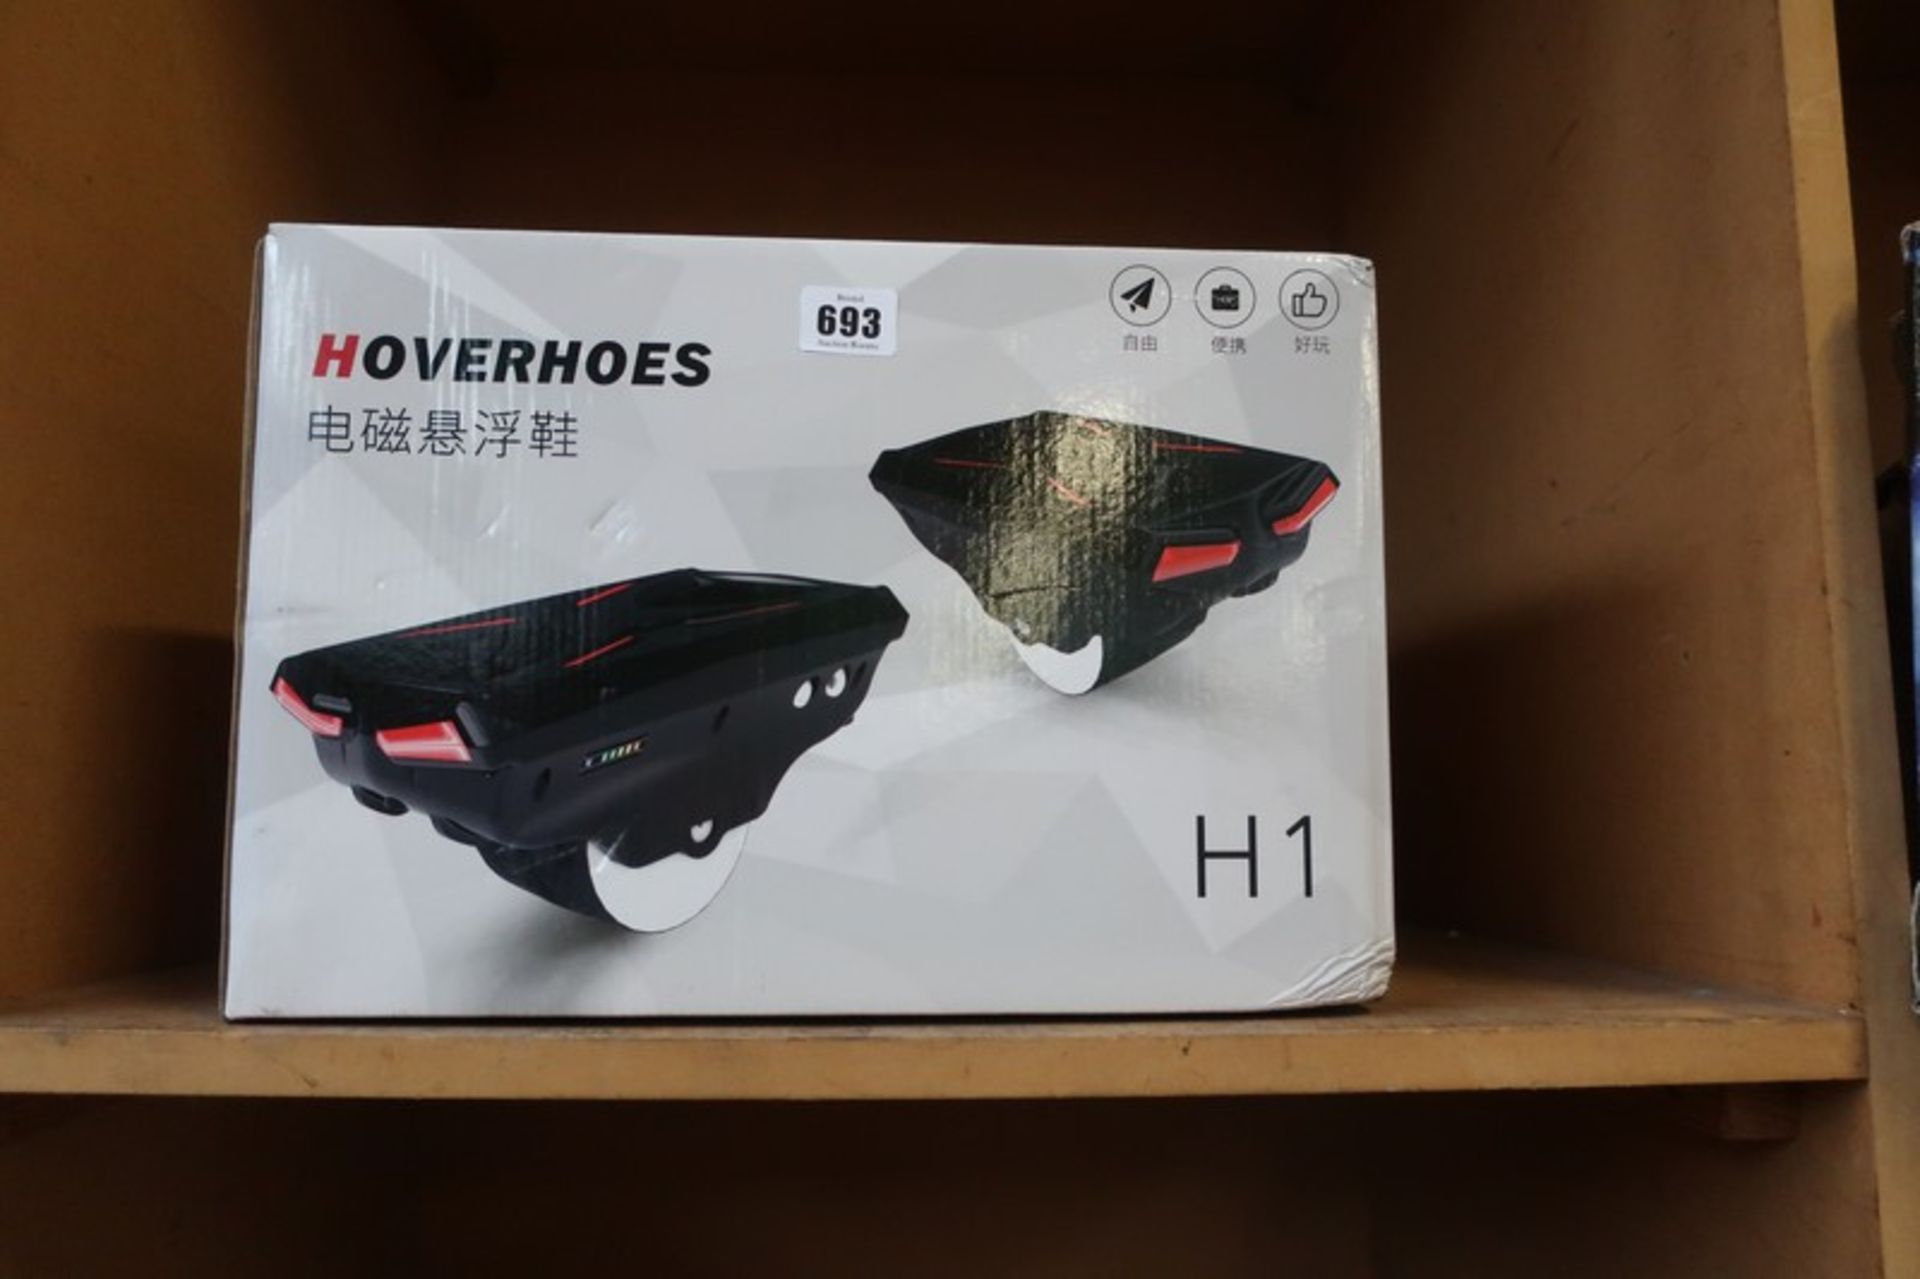 A pair of as new Hoverhoes H1 hovershoes.